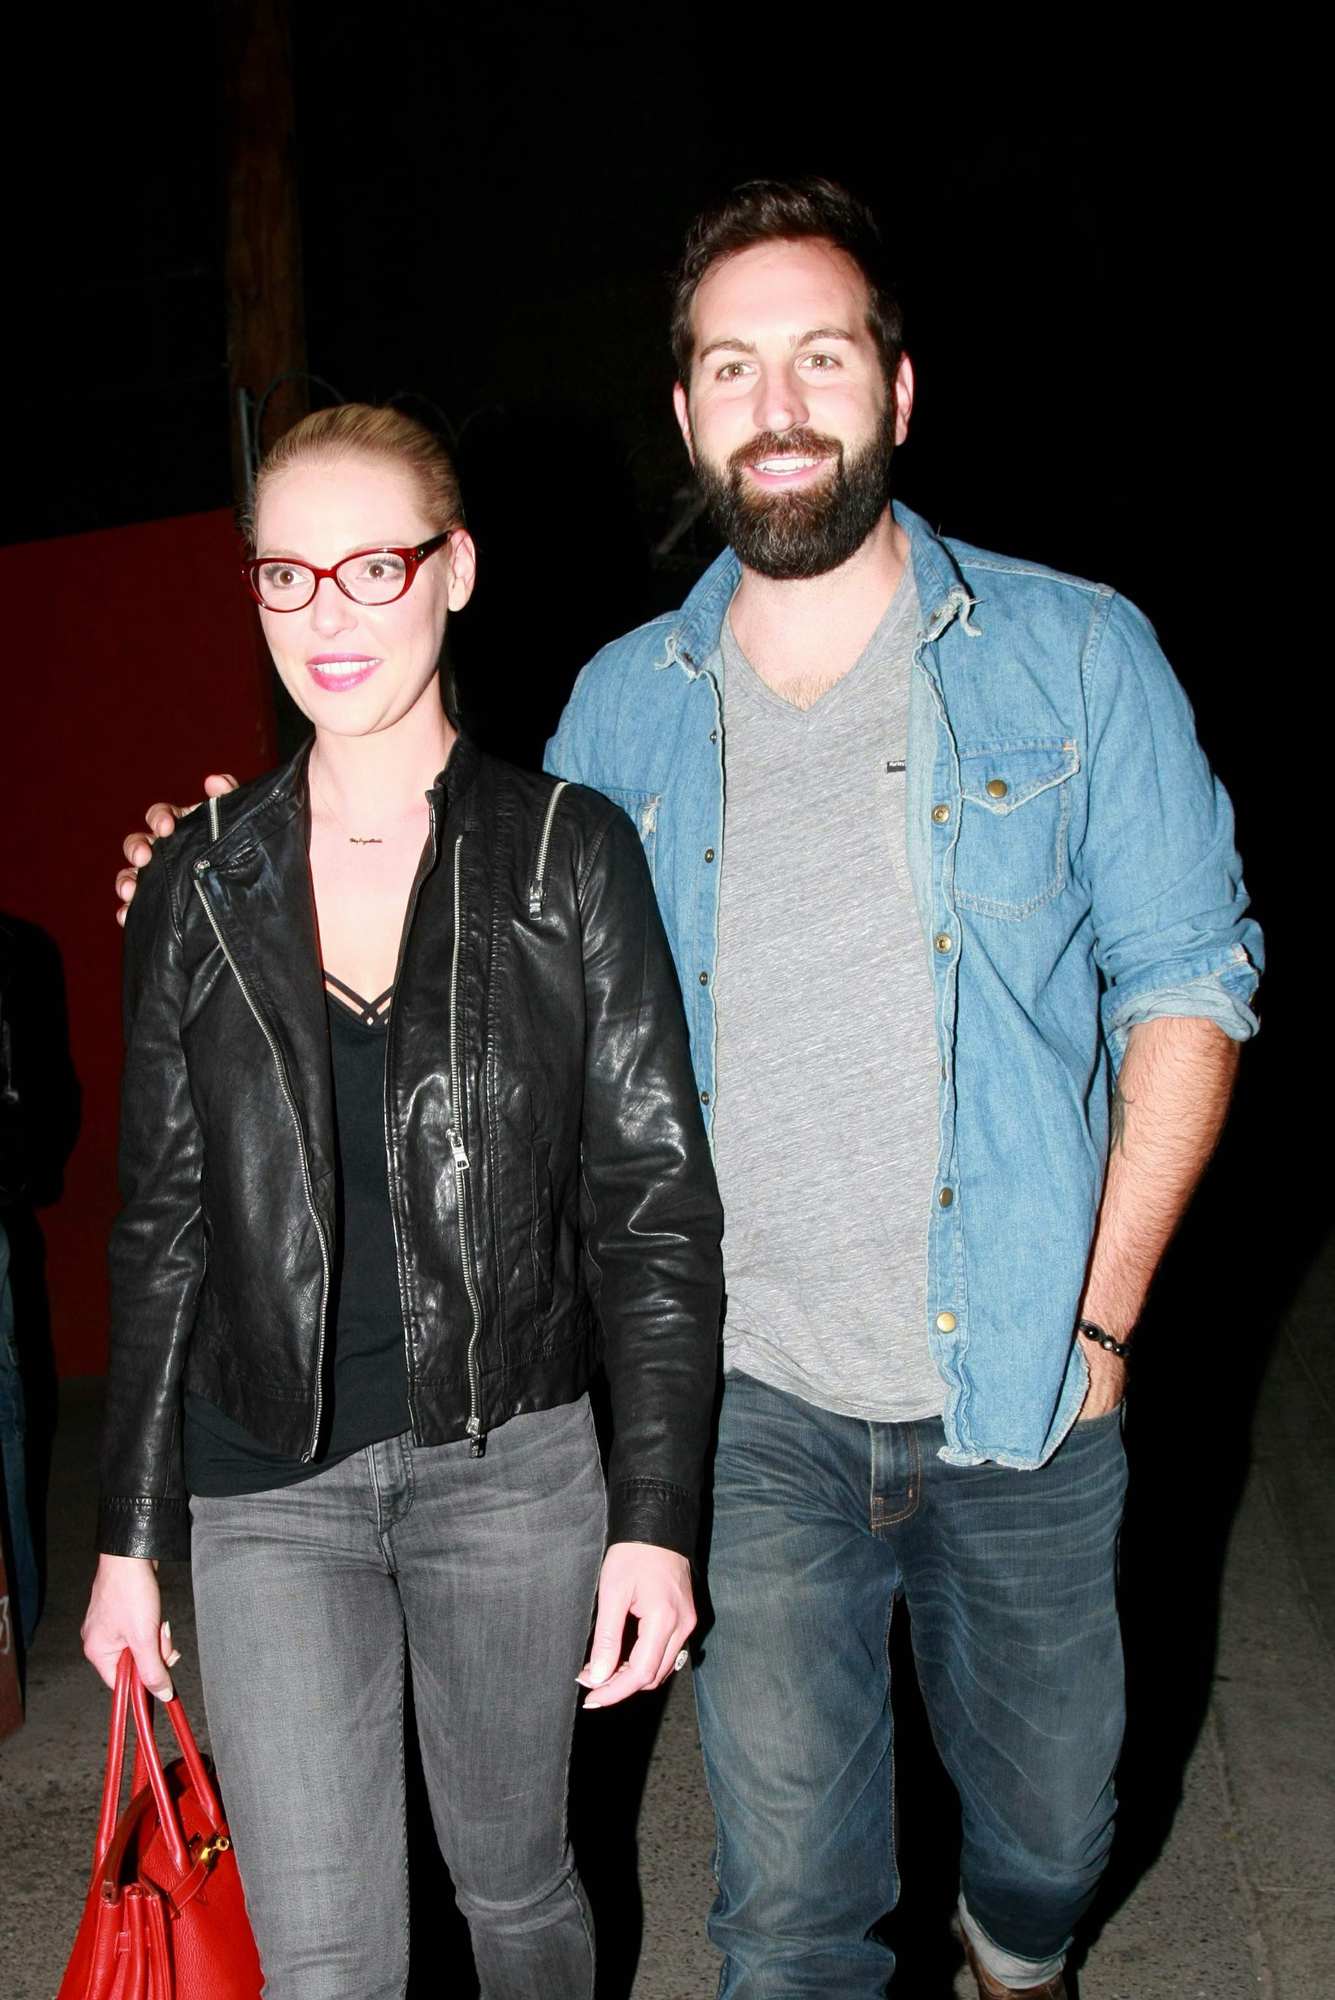 Katherine Heigl Concert Date With Her Husband at Hotel Cafe